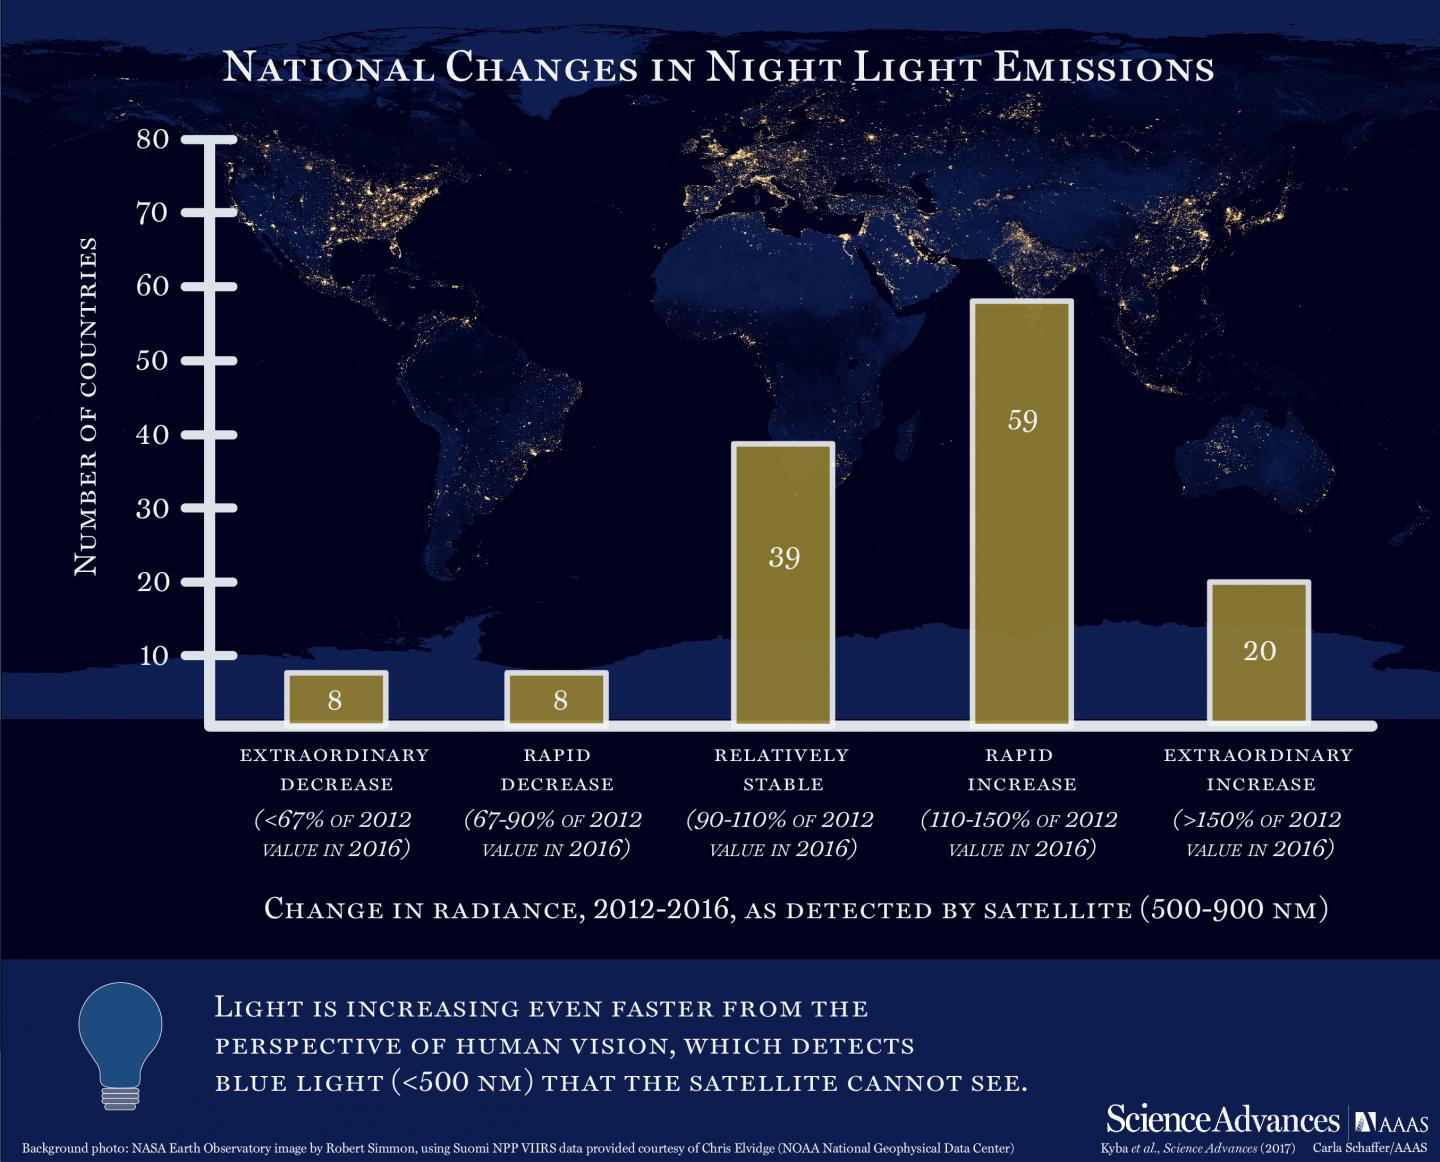 Artificial Lights Increasing 'Loss of Night,' Especially in Some Nations